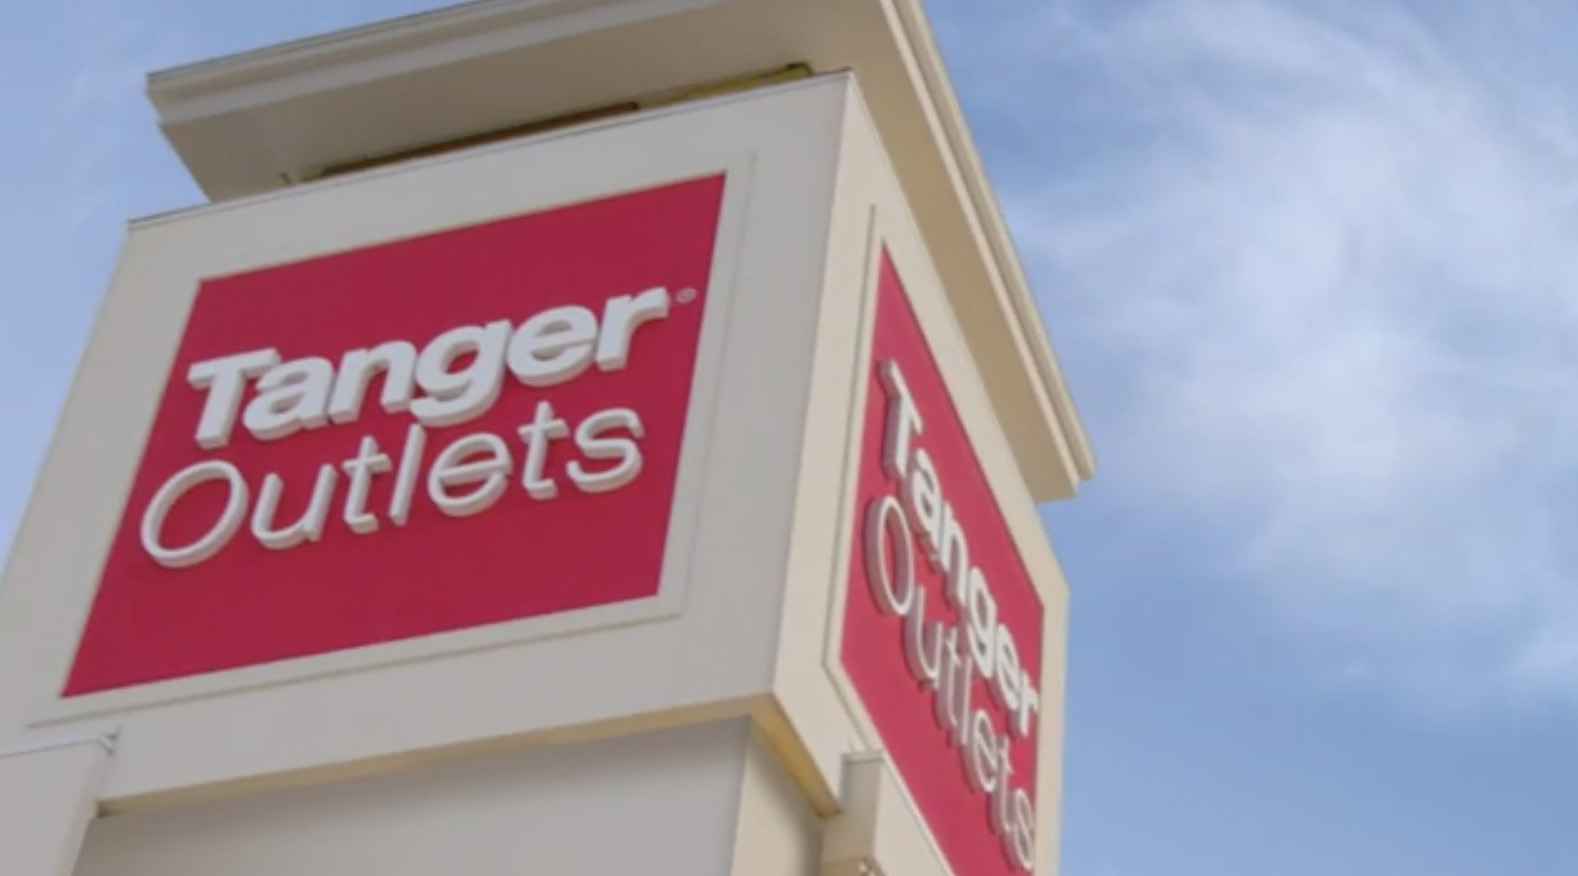 Shop Happy And Save Big This Spring At Tanger Outlets